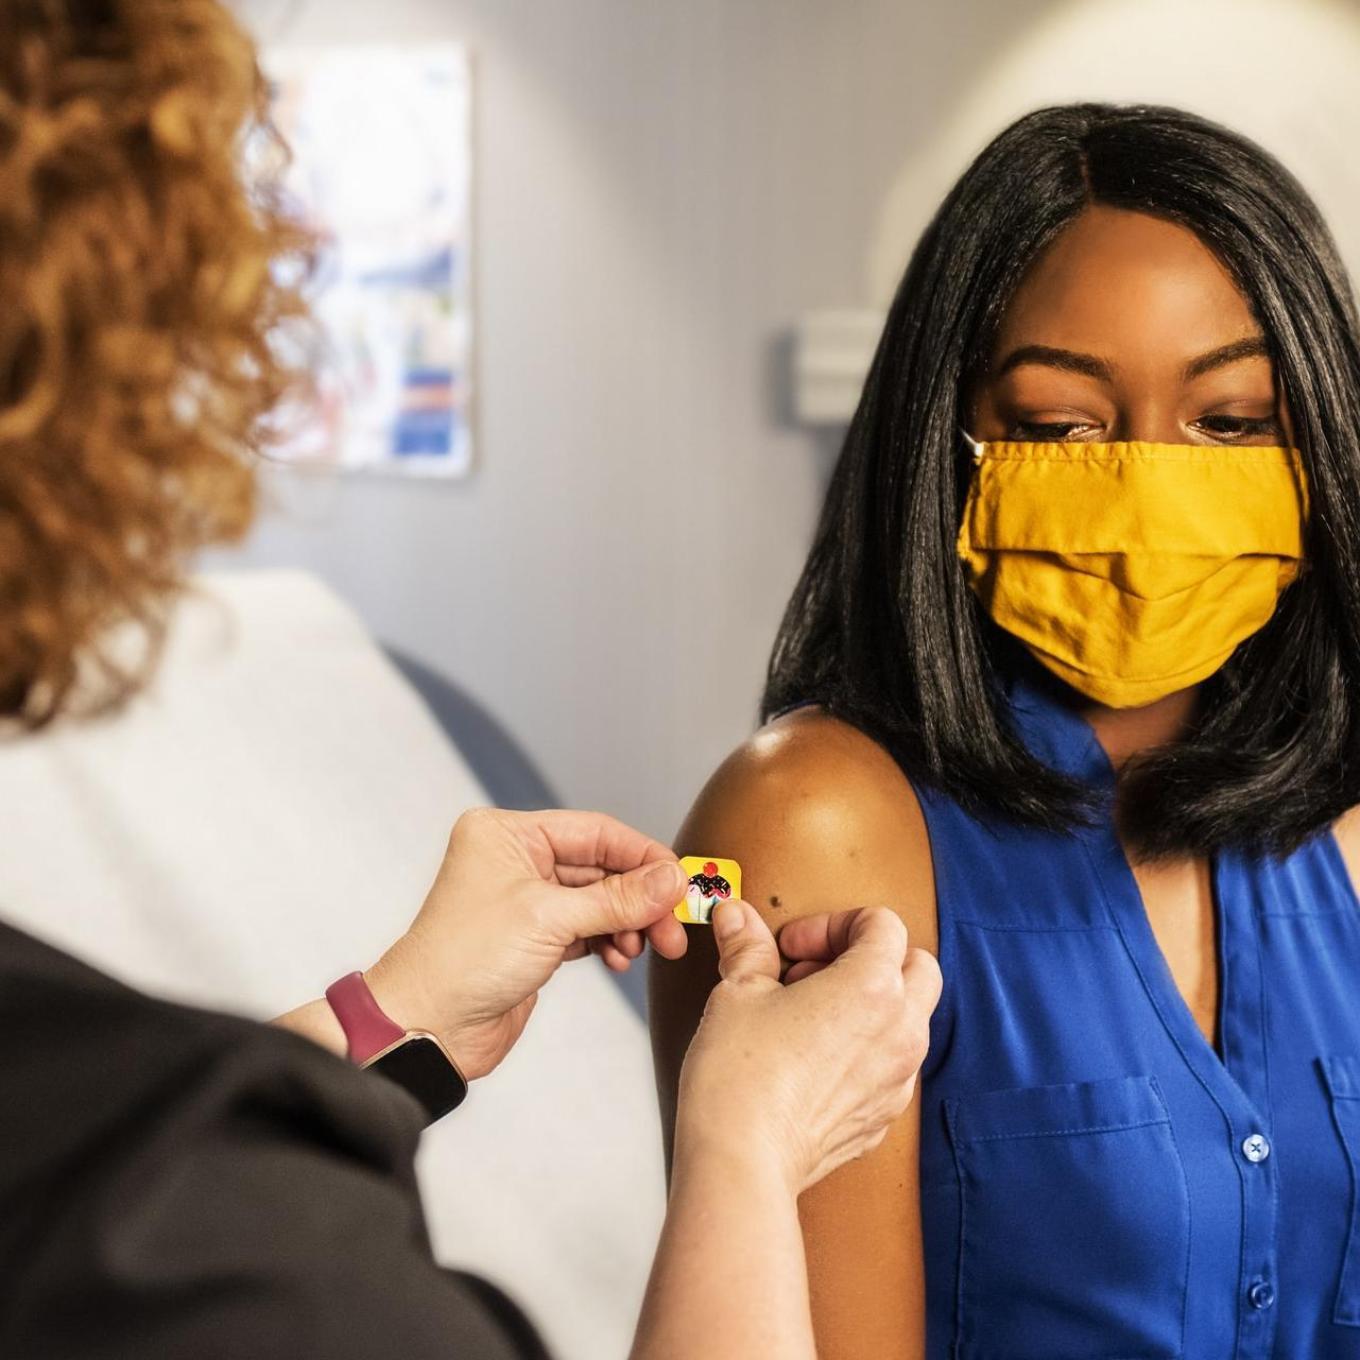 A woman getting a vaccine